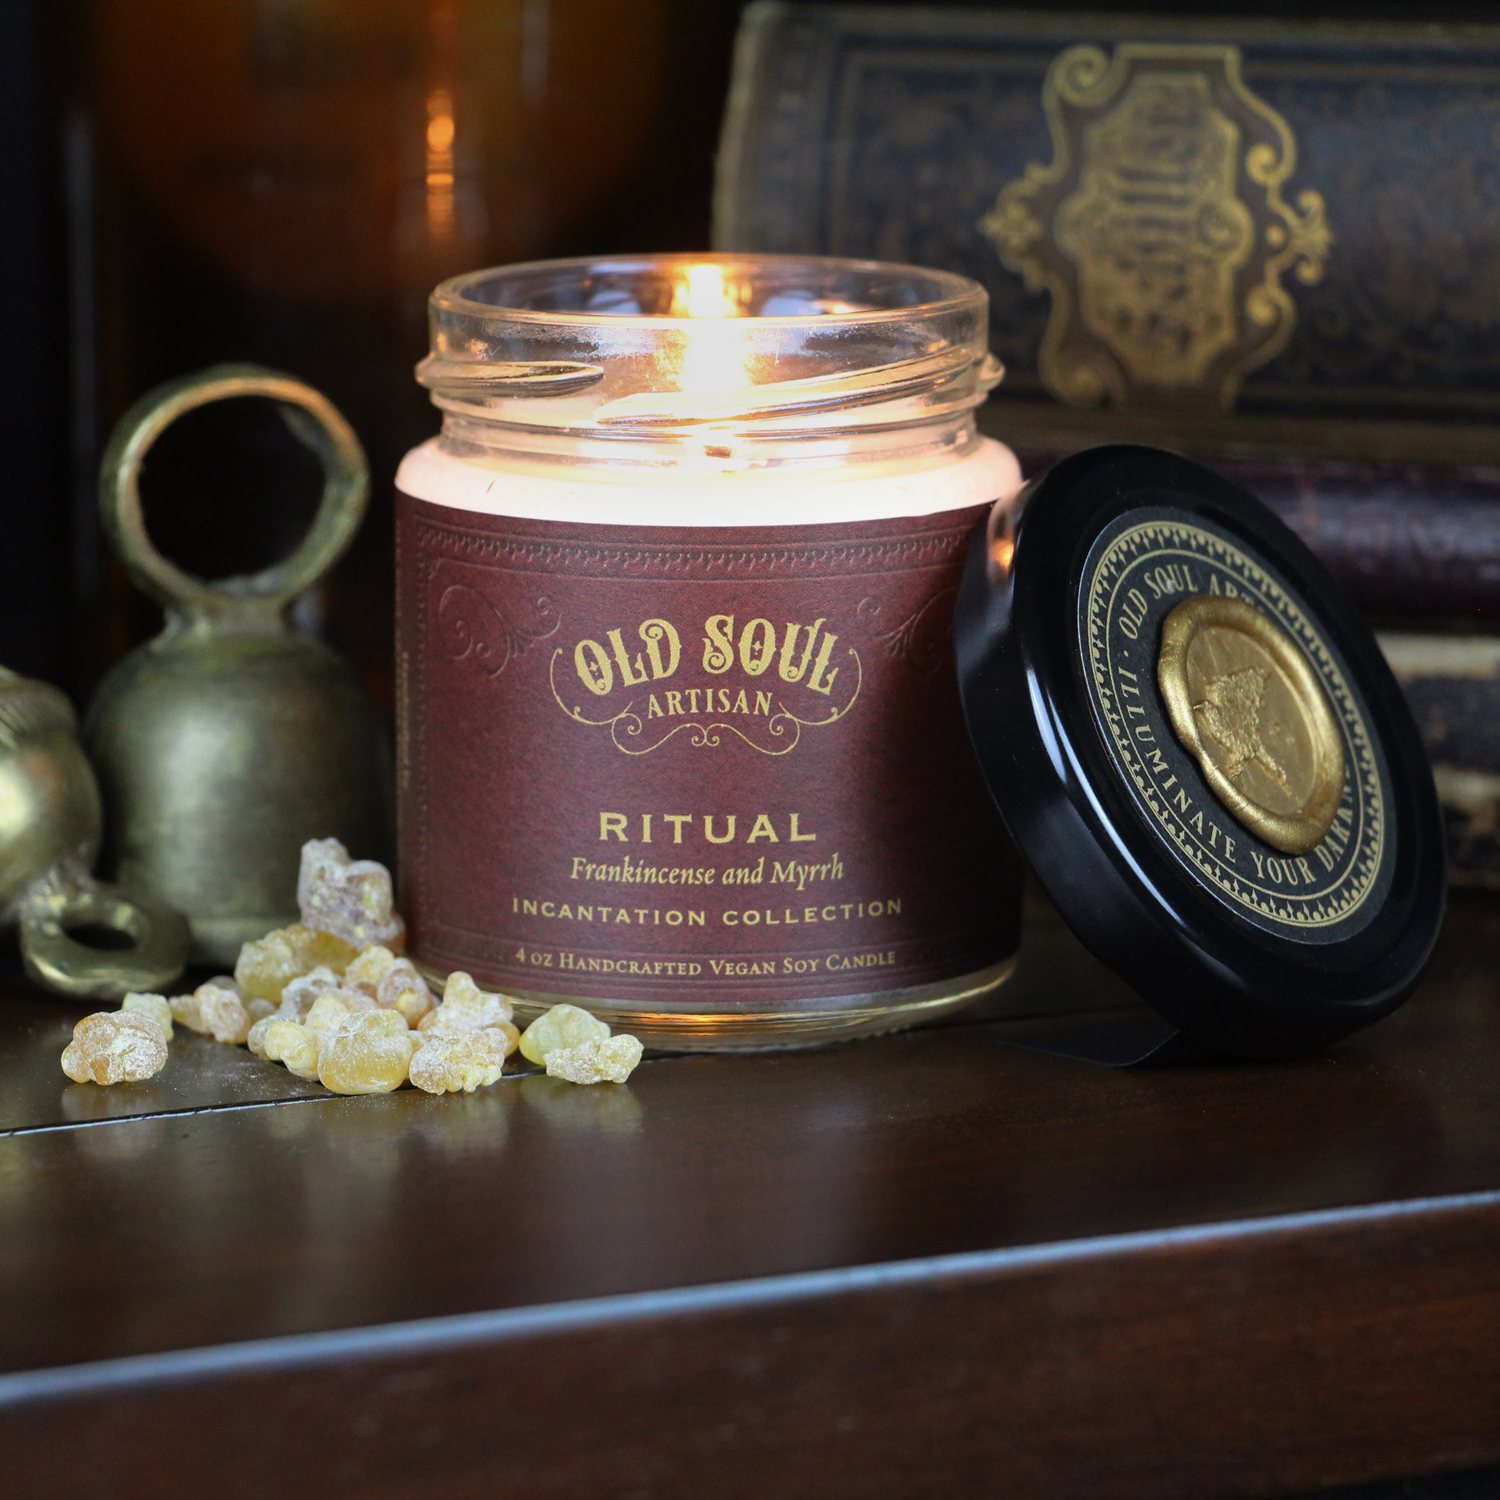 Old Soul Artisan - Candles inspired by literature and folklore